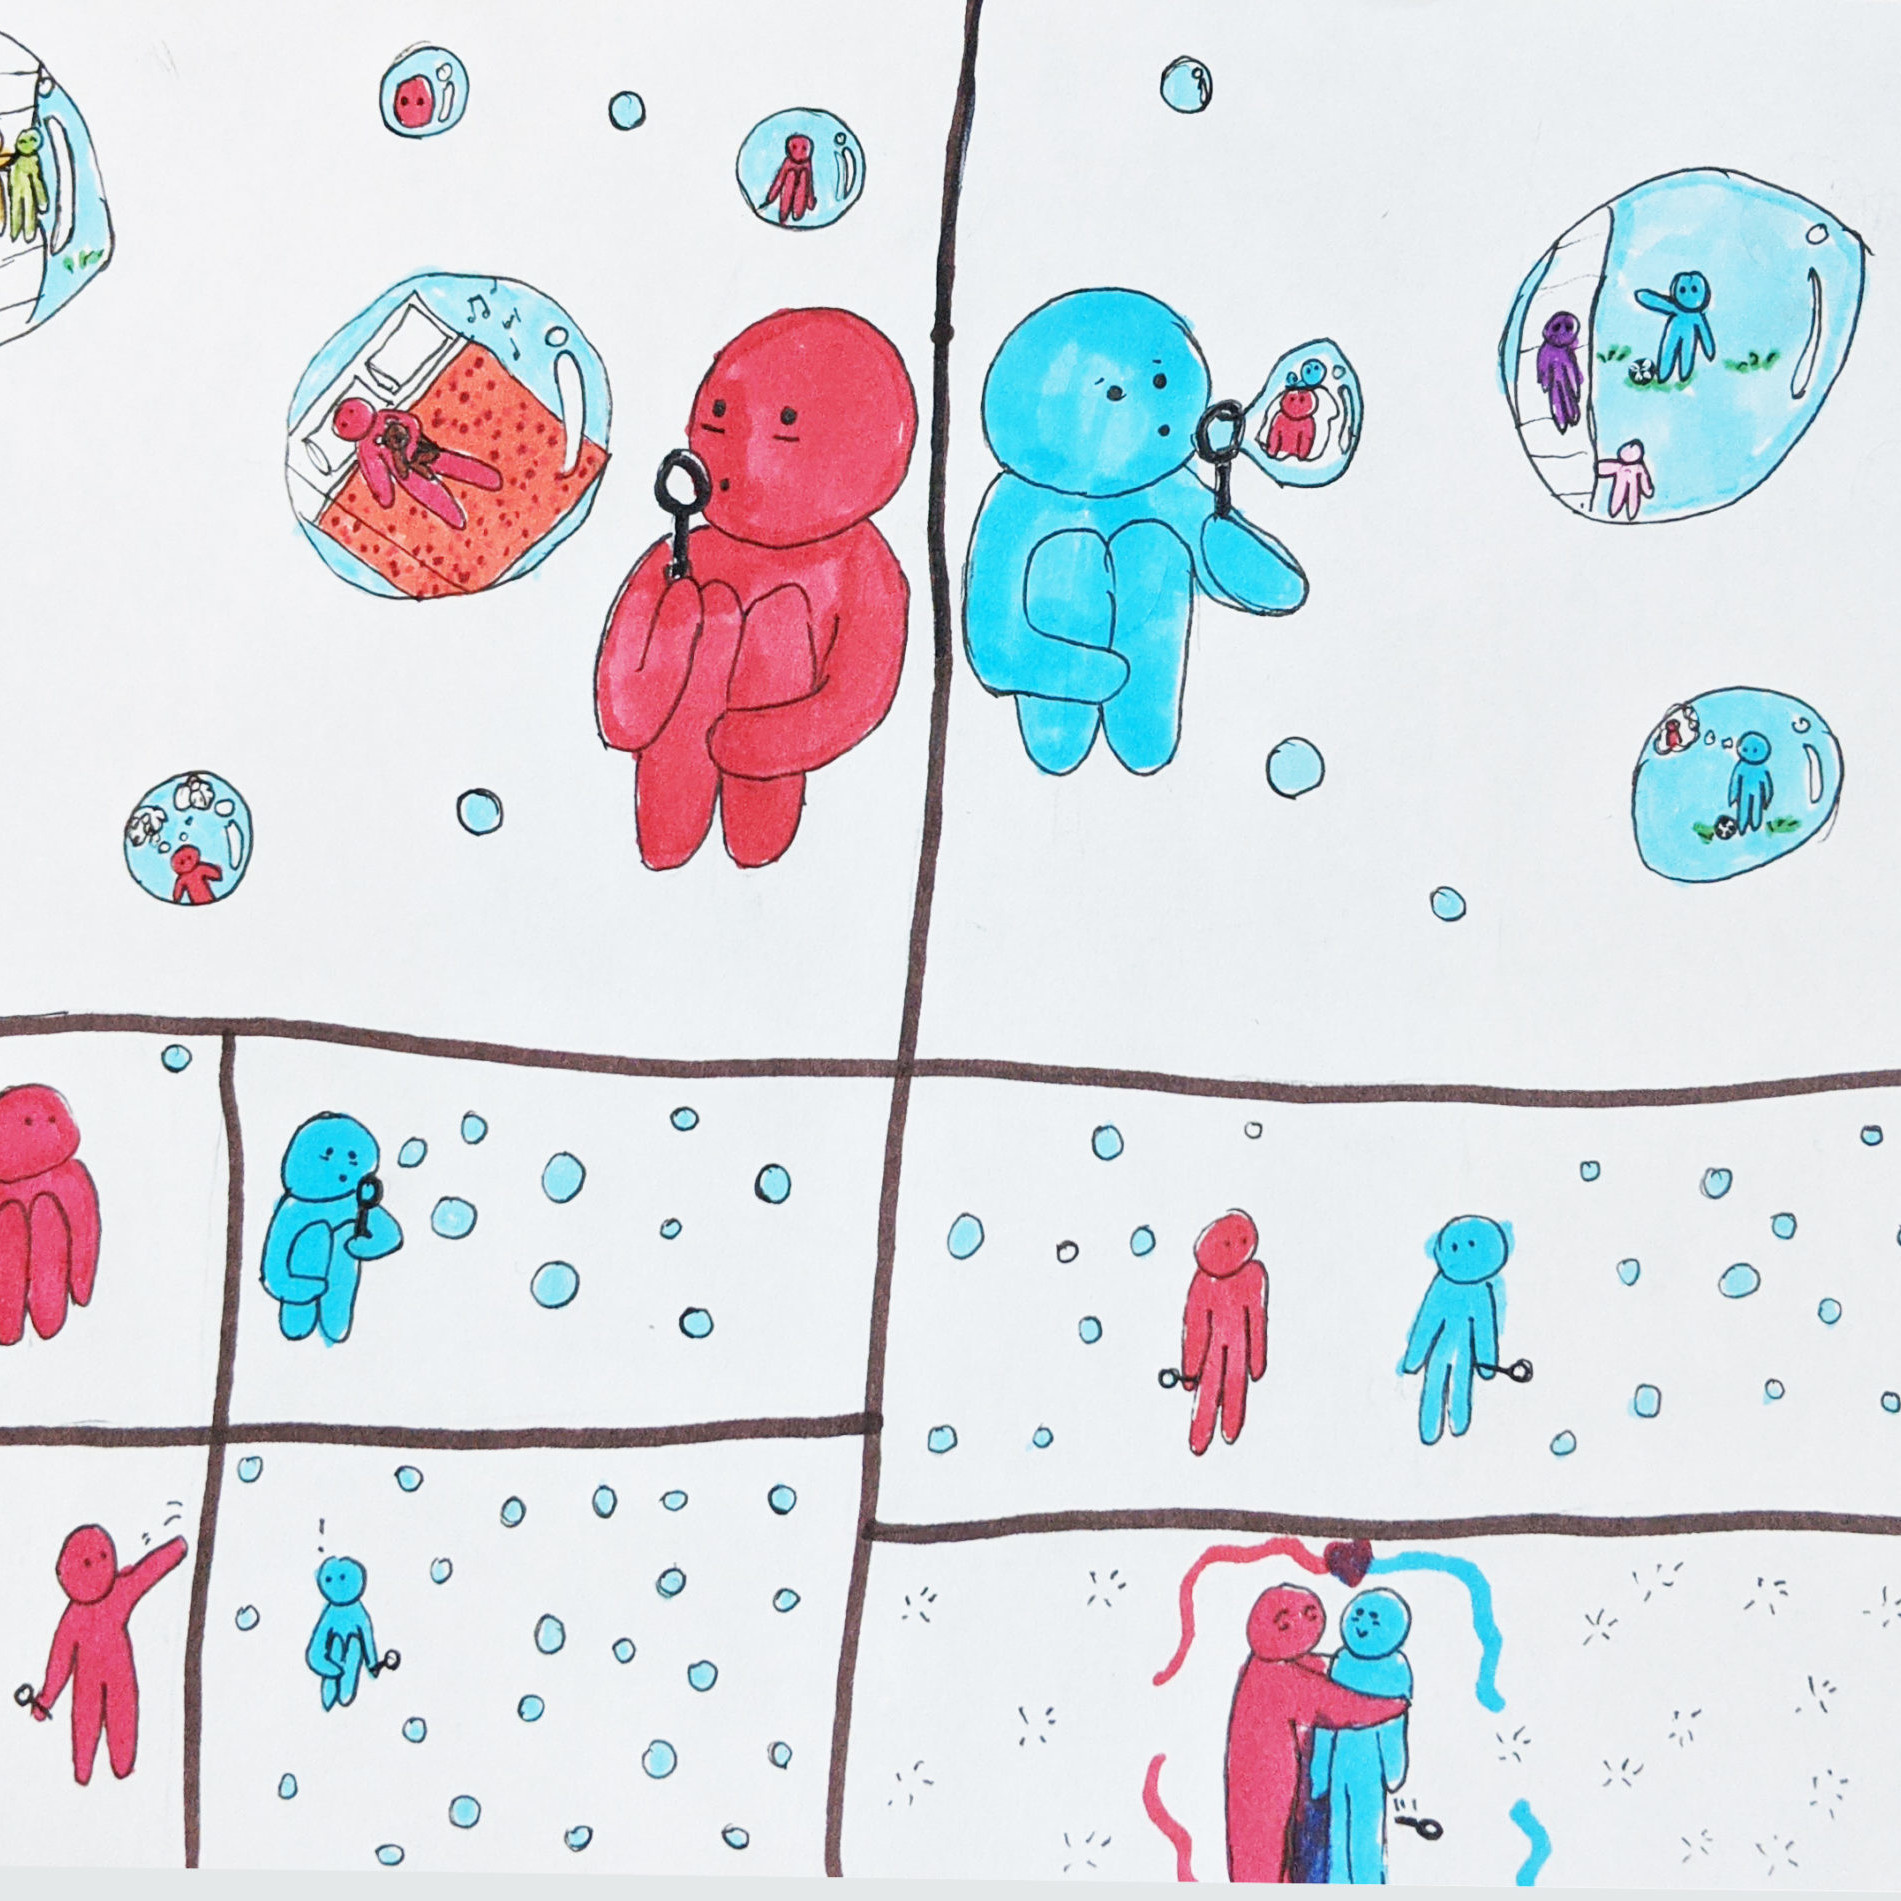 Drawing done in marker shows one person (drawn in red) blowing a bubble to another person (drawn in blue). The two blow bubbles to each other. They are communicate through bubbles in the story board and embrace in a hug in the final scene.